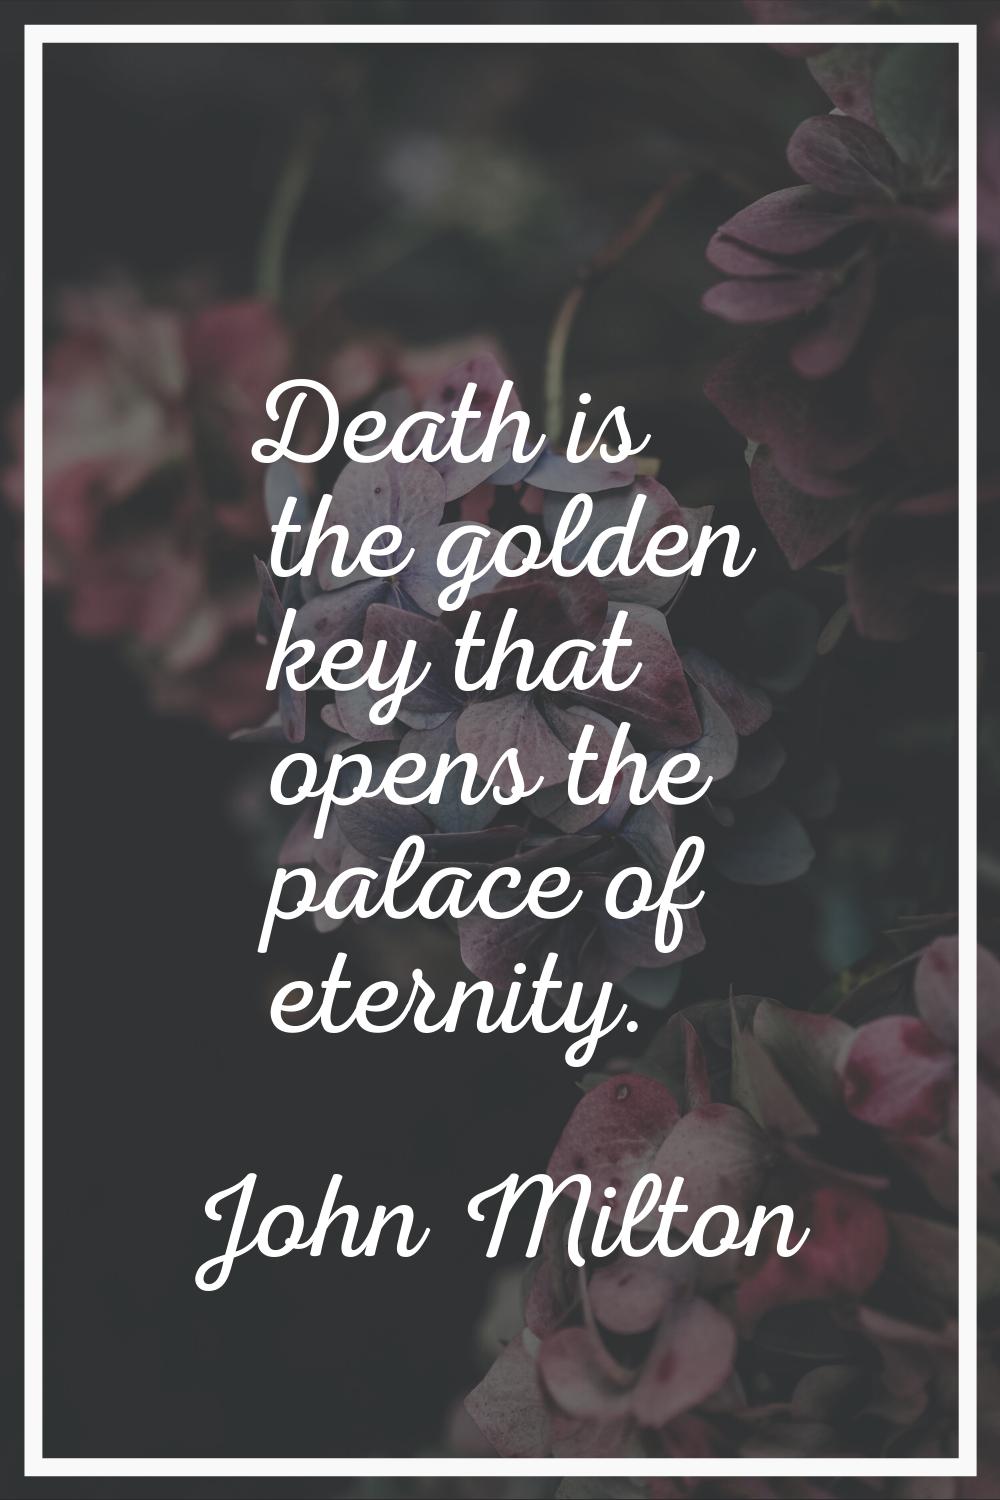 Death is the golden key that opens the palace of eternity.